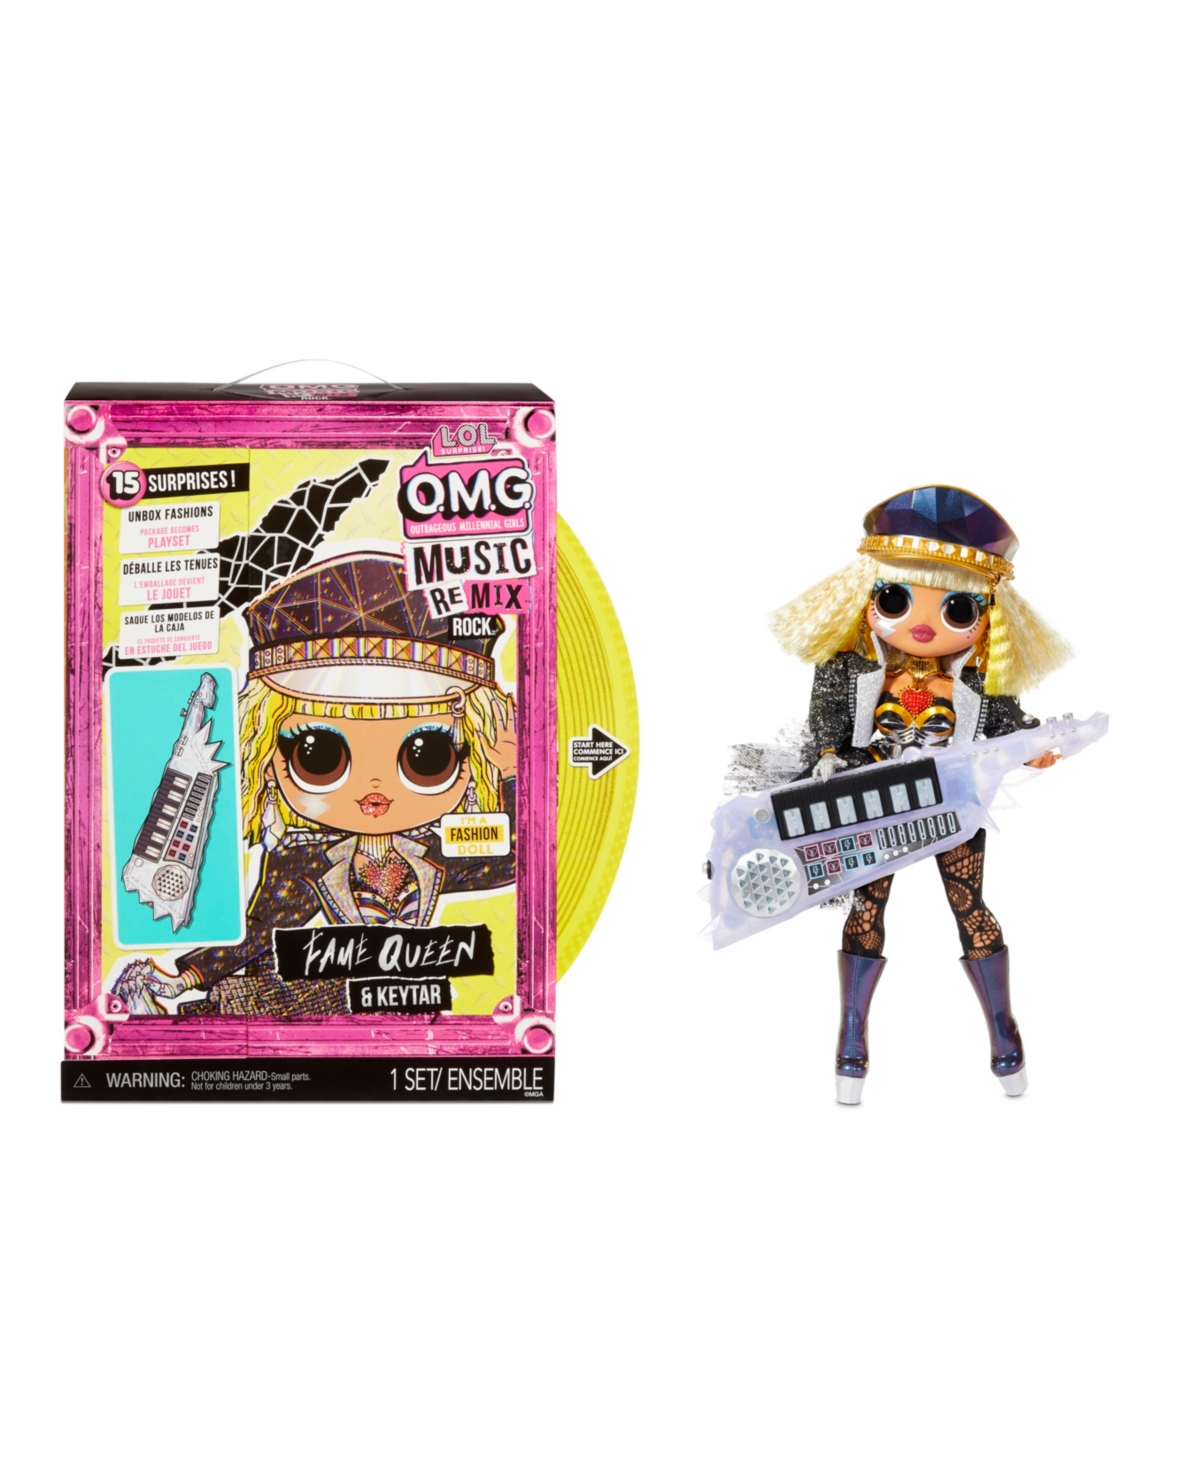 L.O.L. Surprise! - OMG Remix Rock-  Fame Queen and Keytar